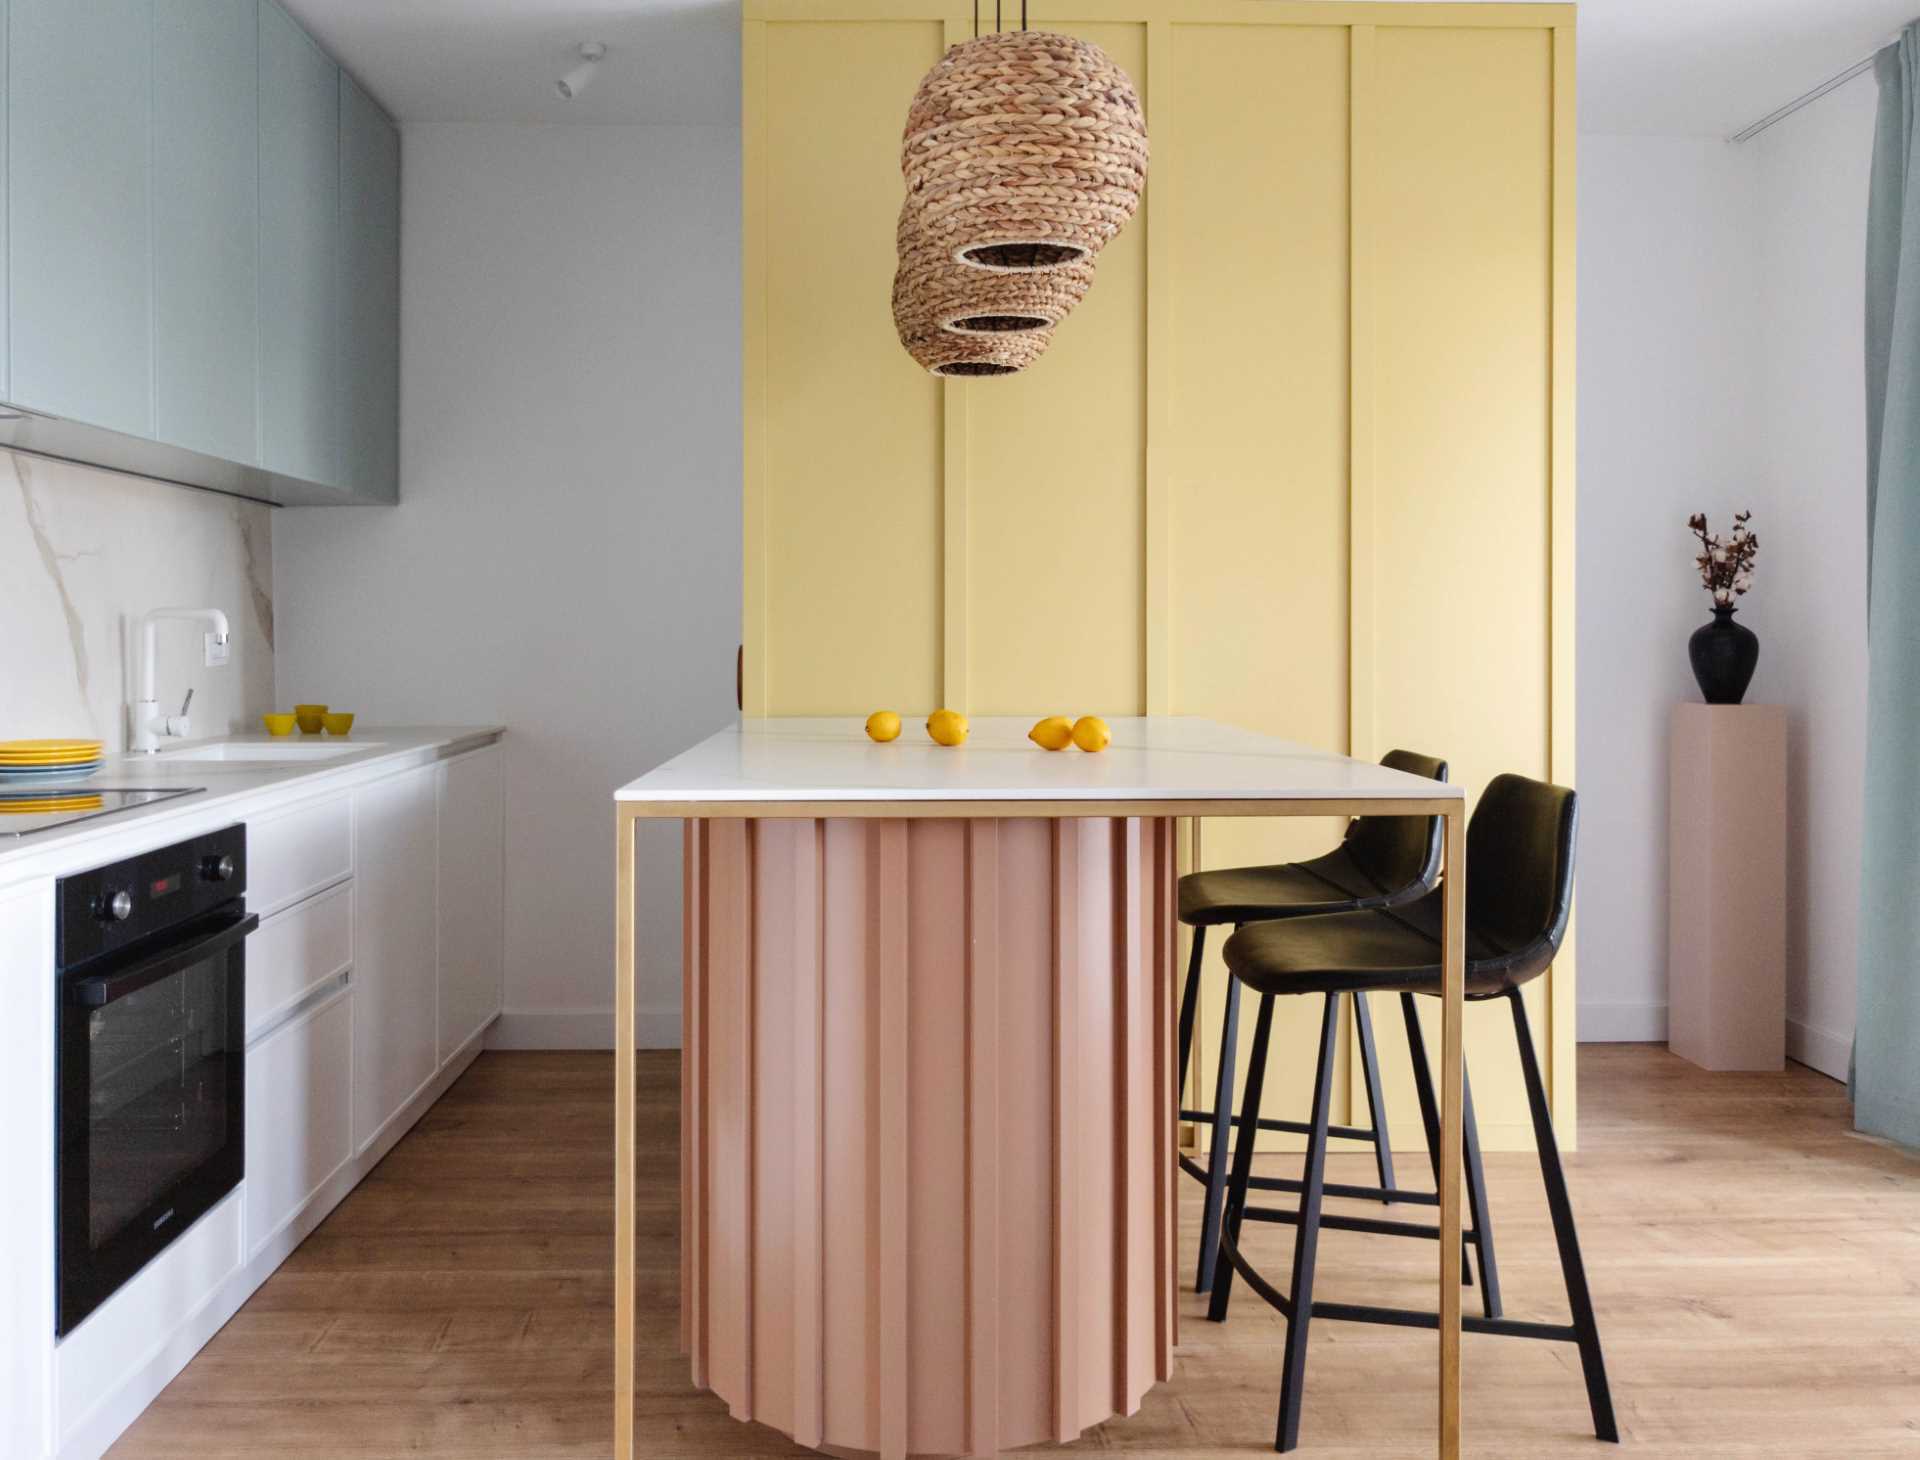 Pastel colors have been used to brighten up this contemporary kitchen, with a yellow accent wall, a curved light pink base for the peninsula, and muted mint green for the upper cabinets. Woven pendant lights add a natural touch to the space.